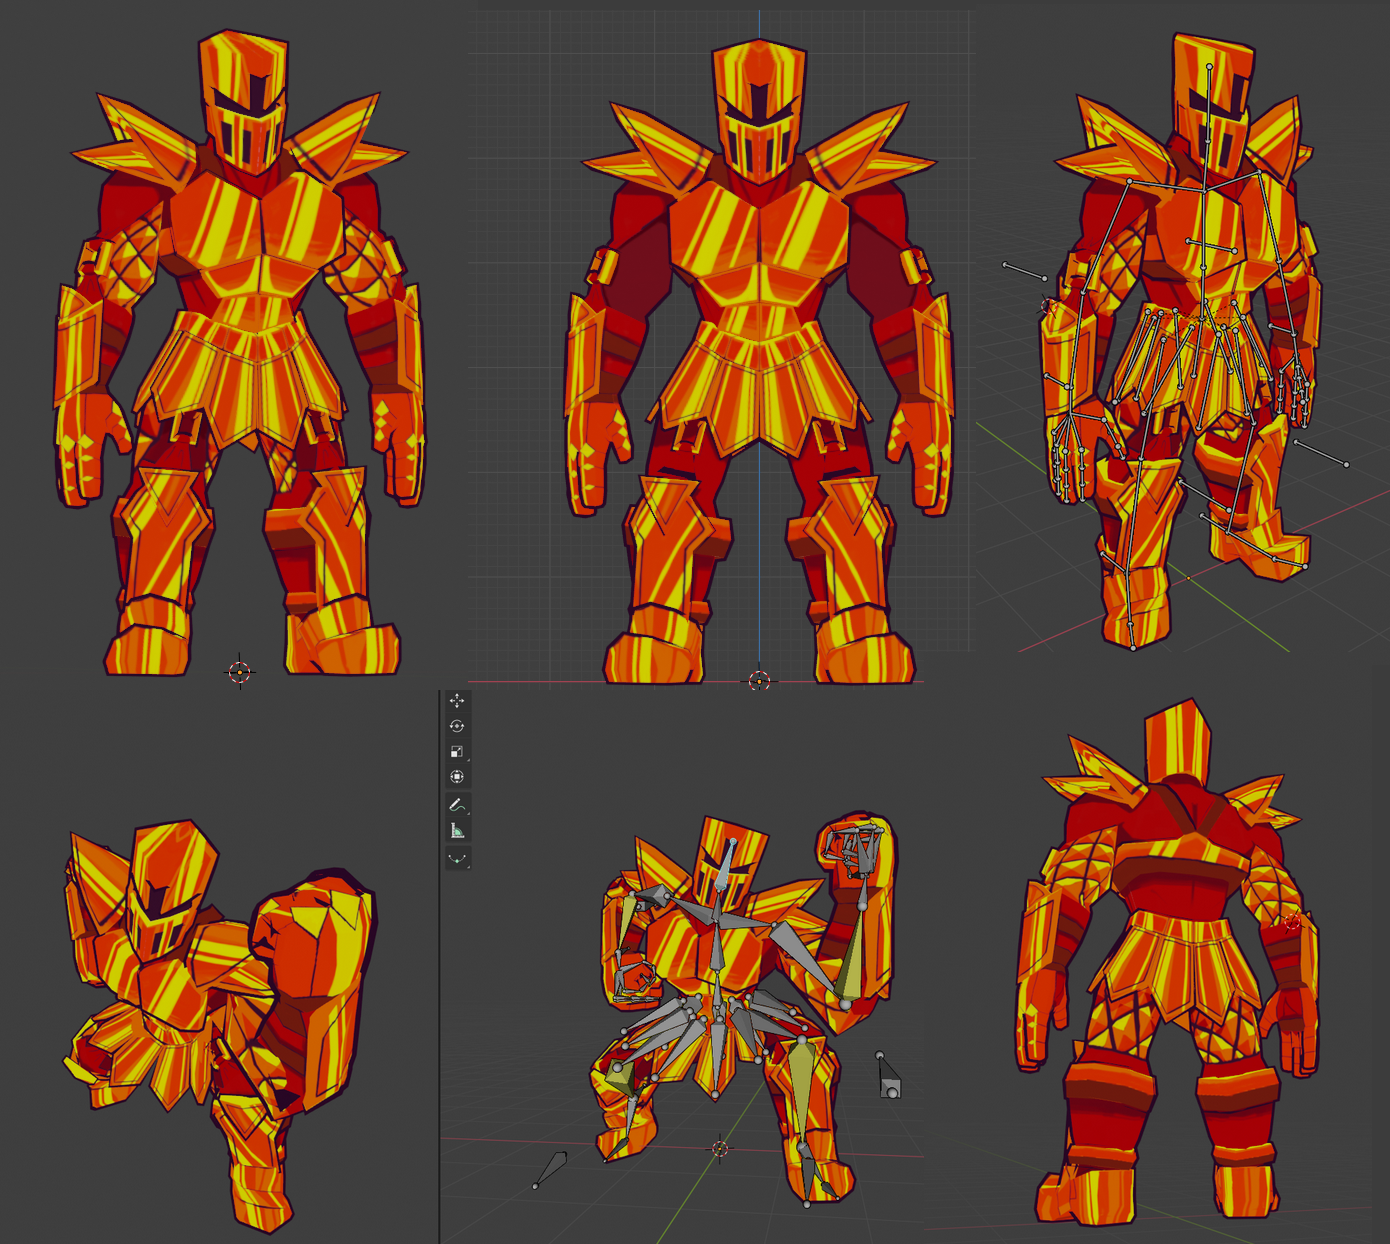 FIGHT KNIGHT REFERENCE MODEL